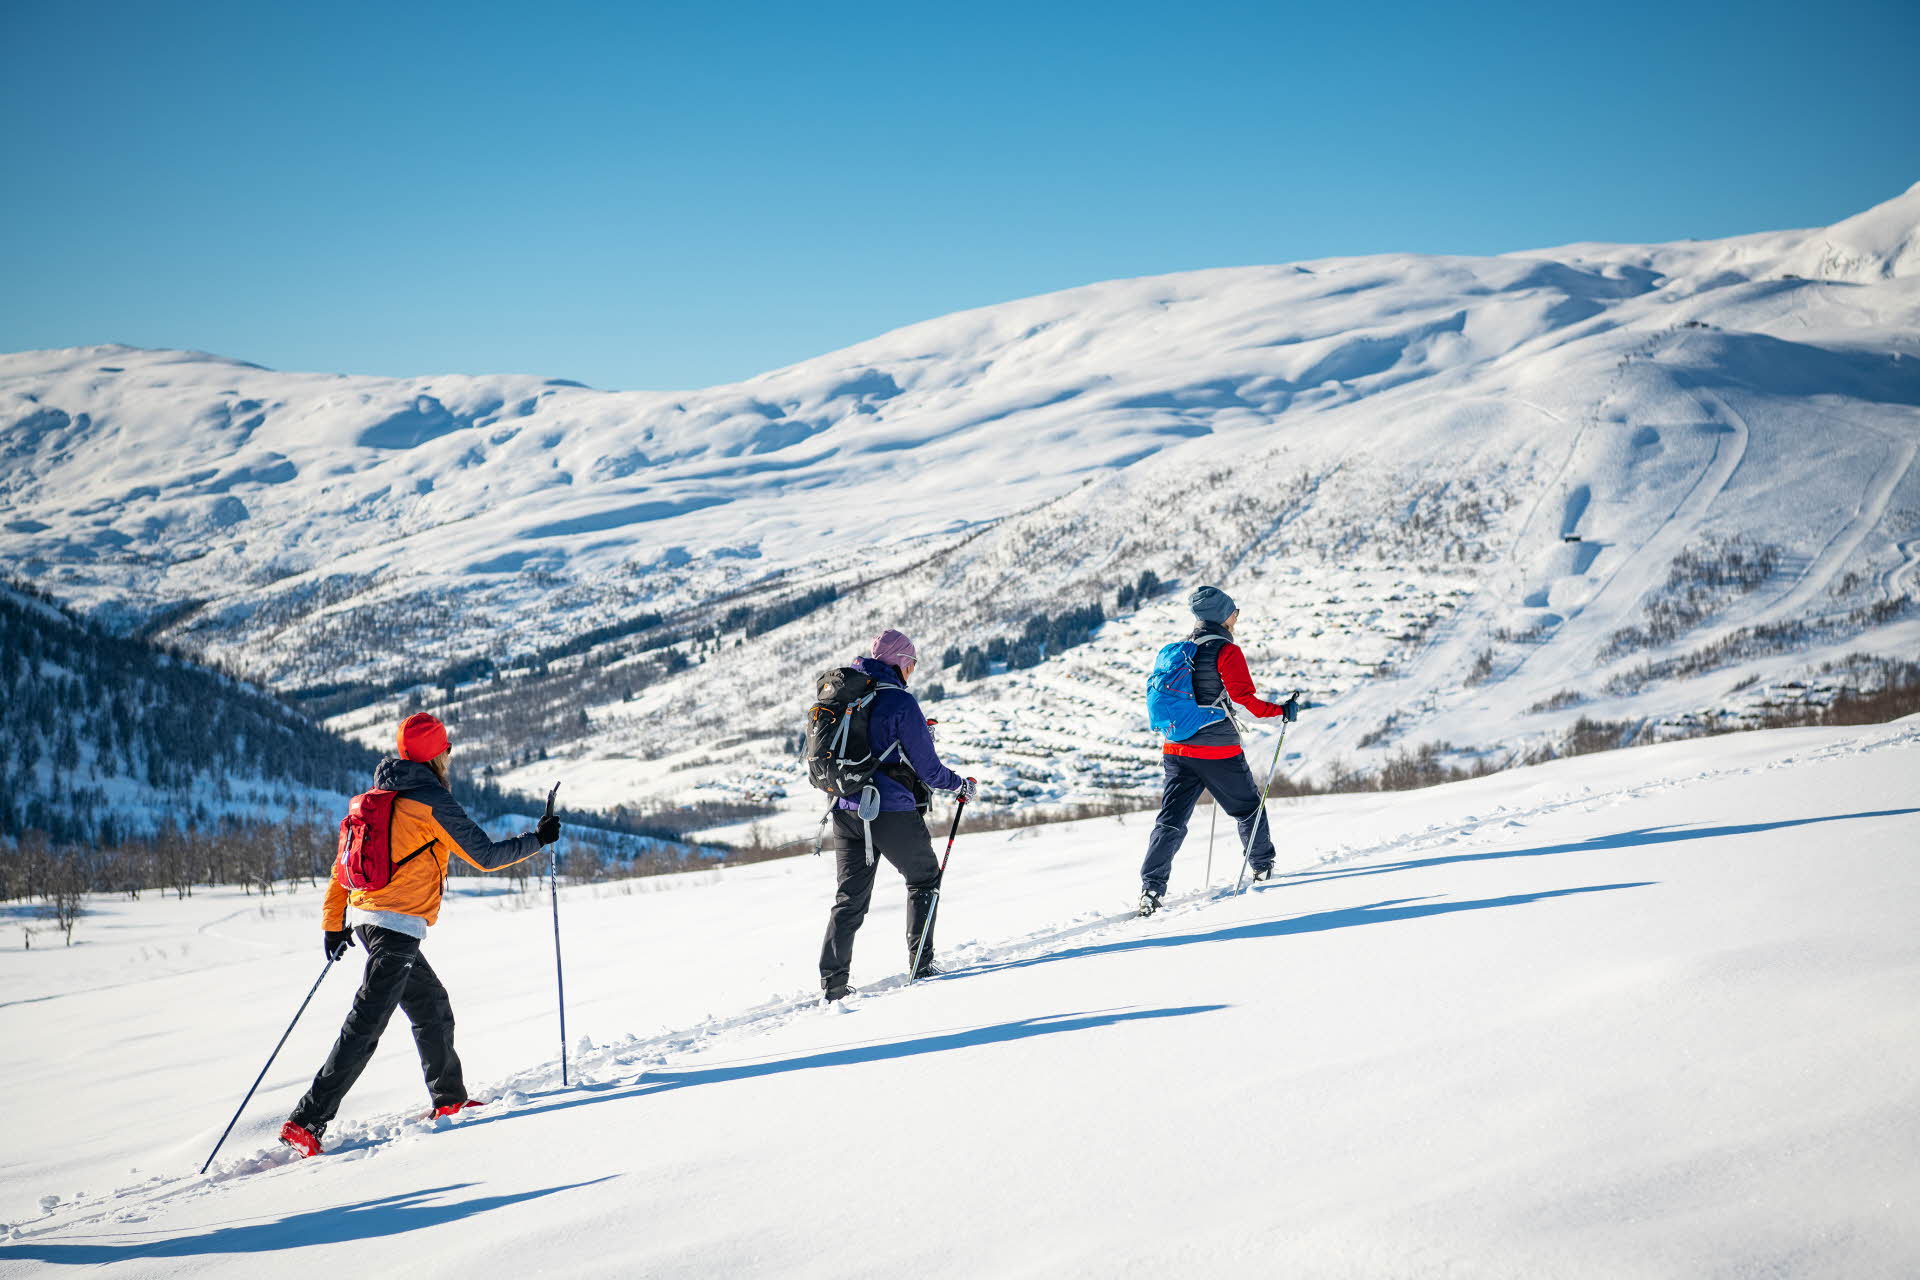 Three people backcountry skiing in line, with Myrkdalen Mountain Resort in the background.